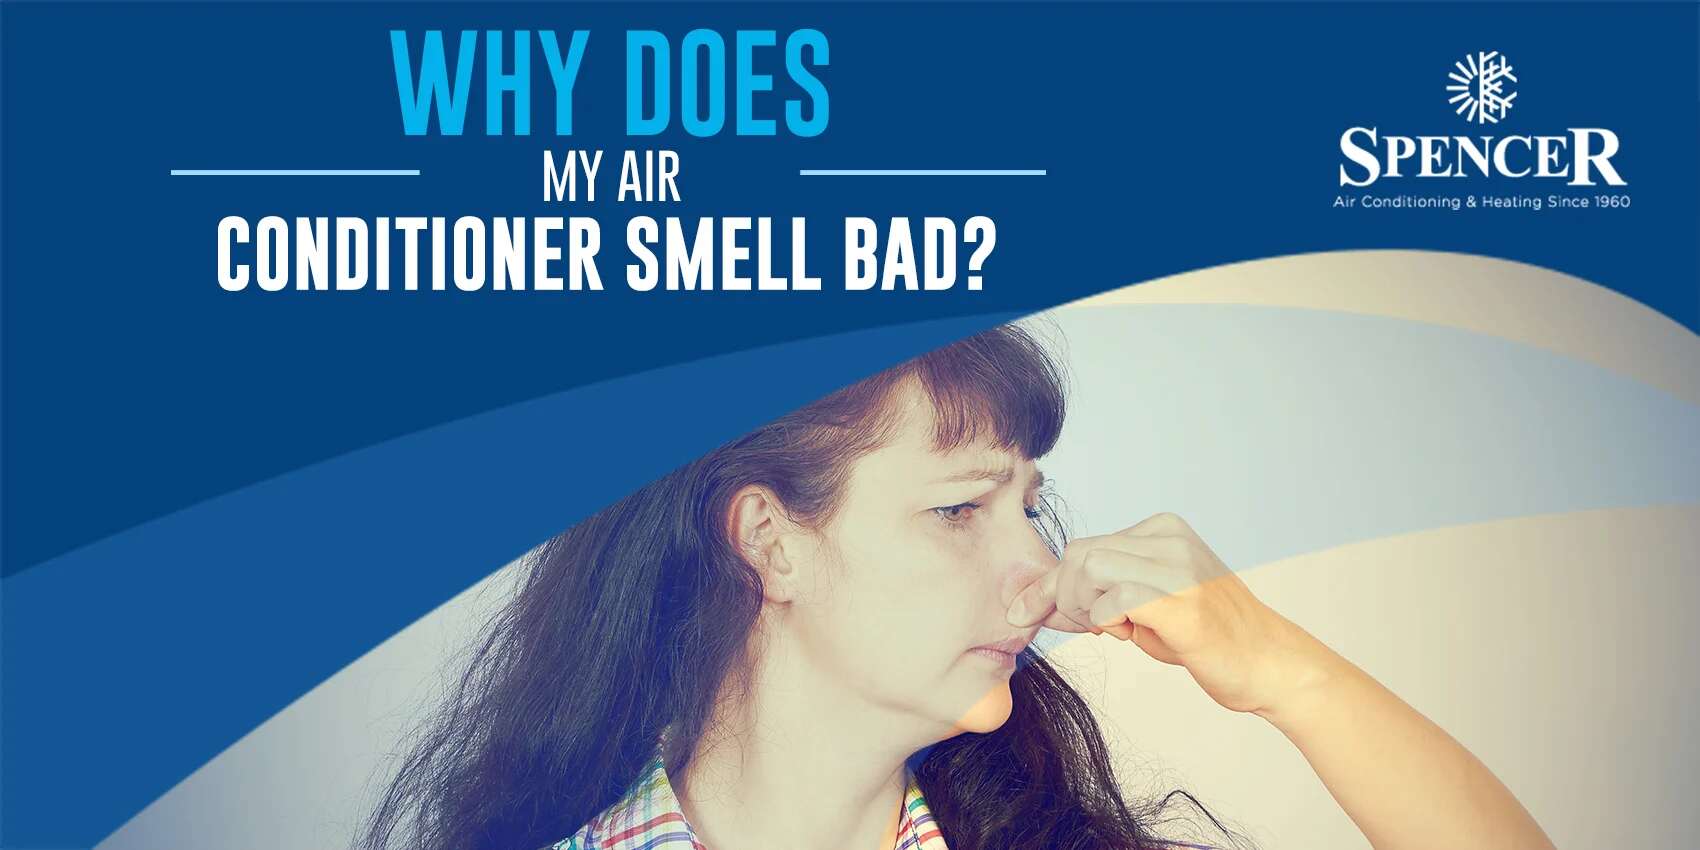 Why Does My Air Conditioner Smell Bad?